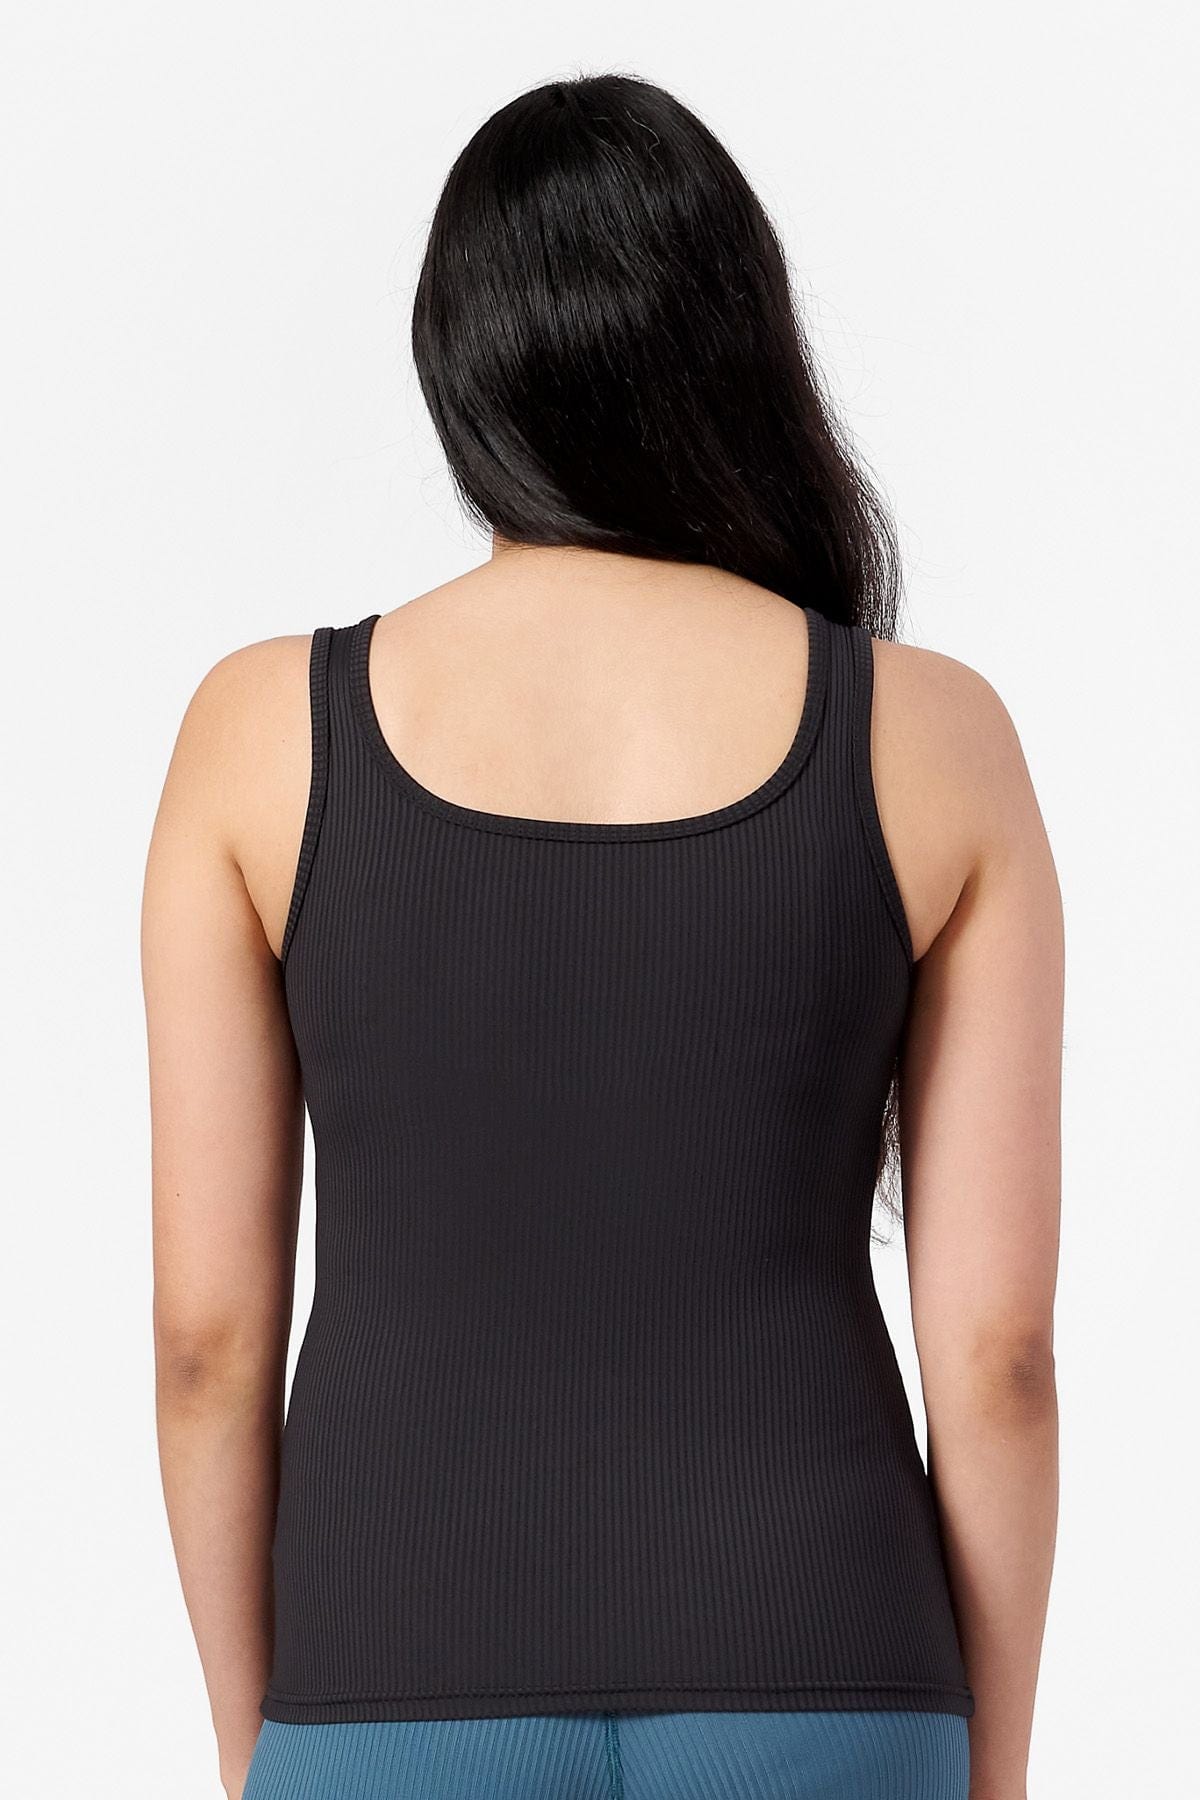 square neck tank top made from ribbed material worn by a woman